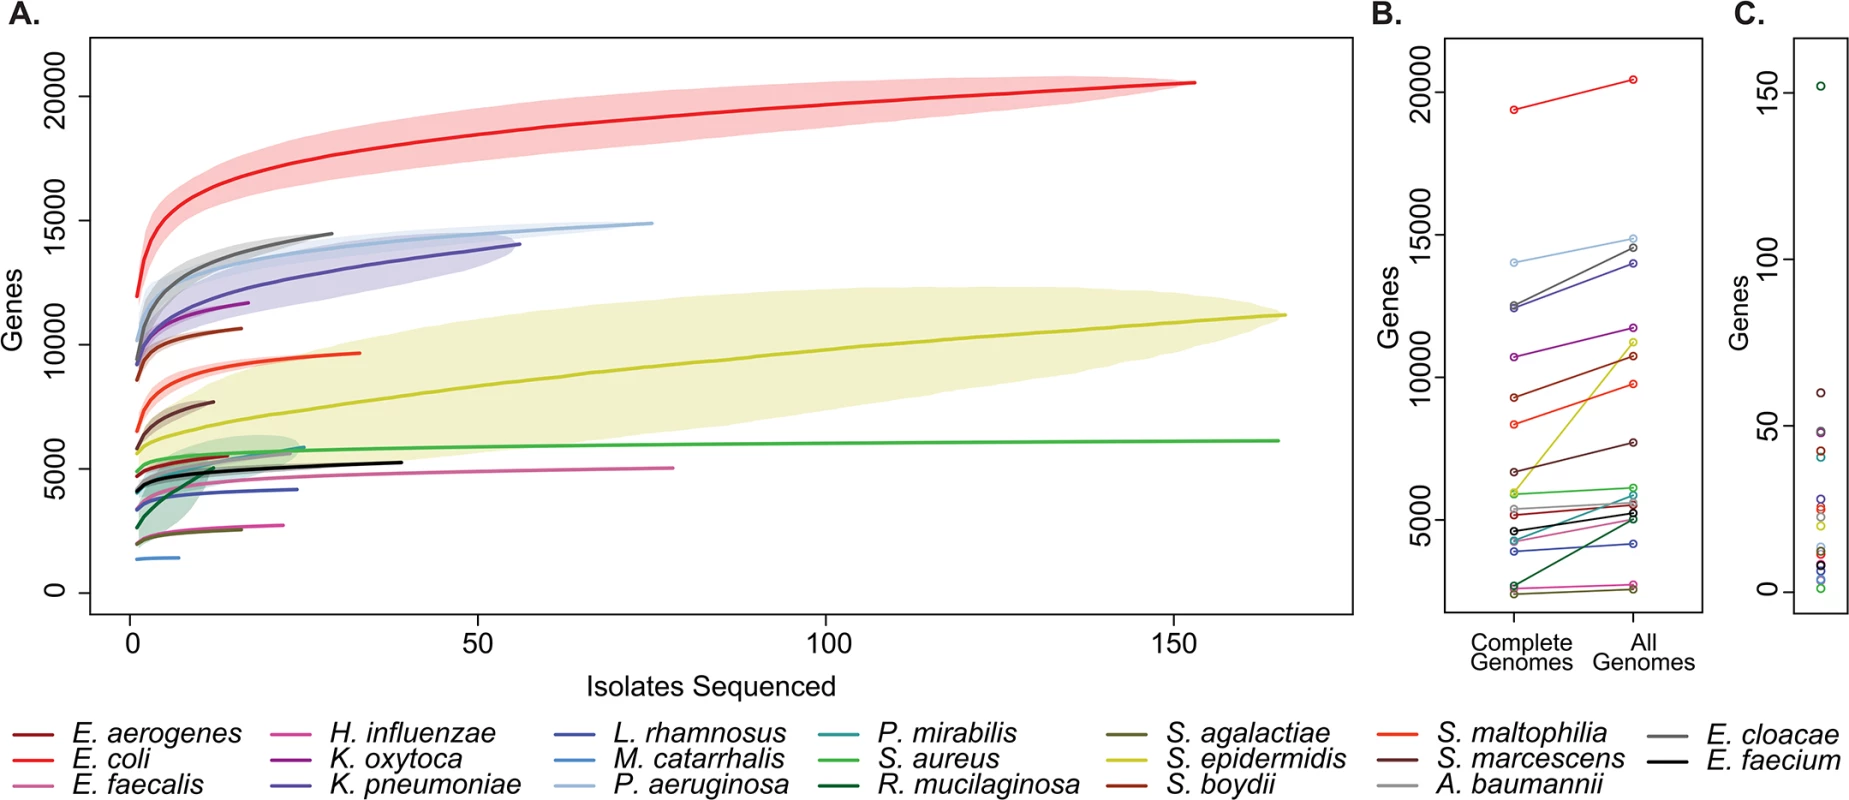 Pan-genome curves of the most abundant organisms recovered from clinical sampling.